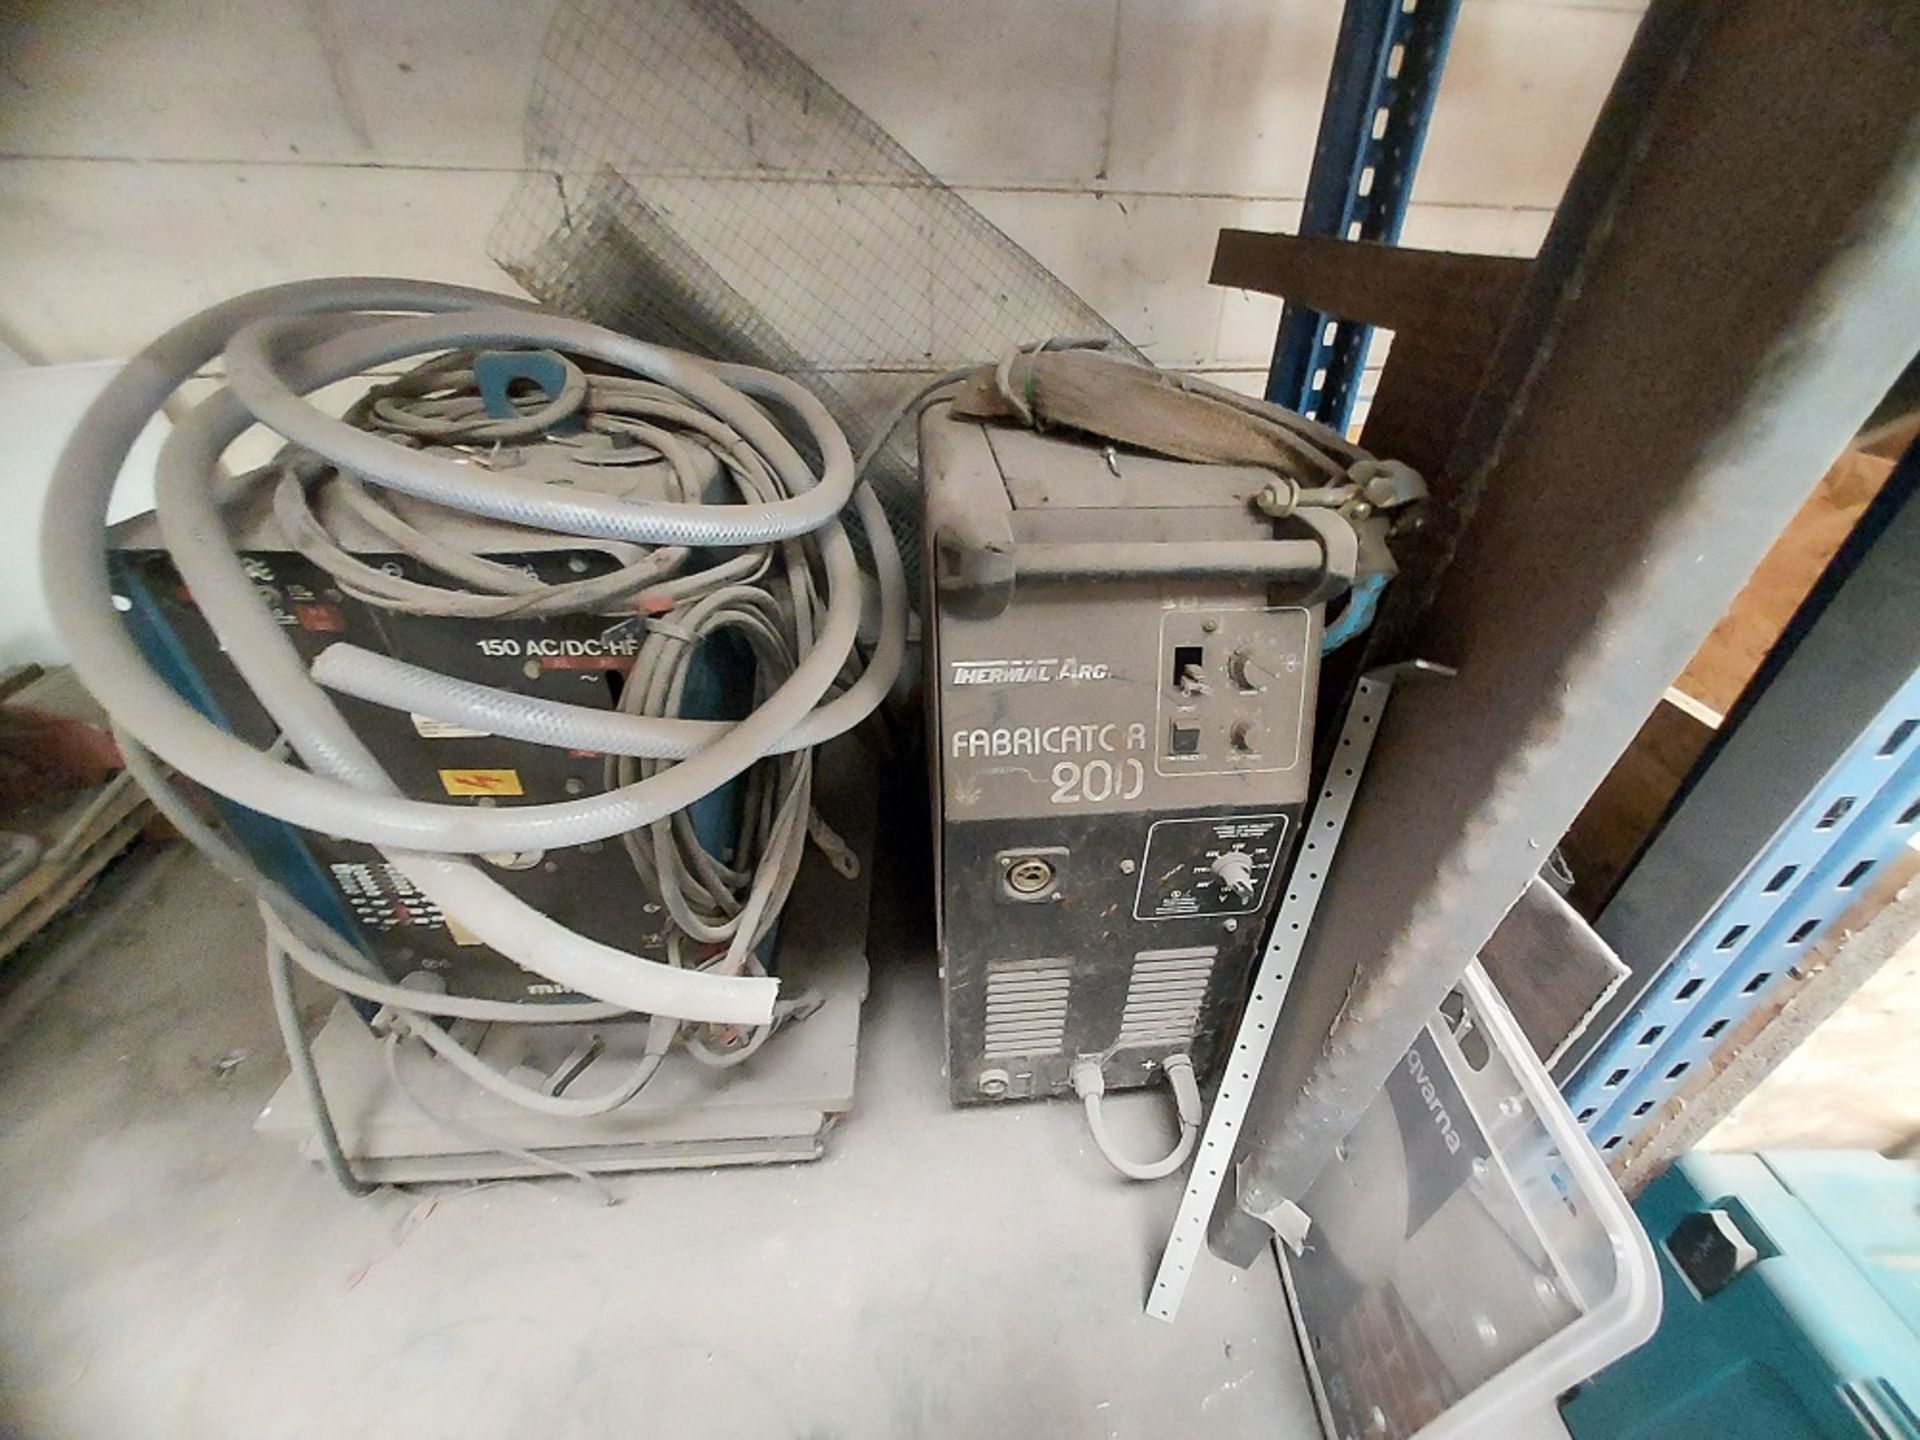 Assorted Arc, Gas and Aluminium Mig Welding Equipment Including Some Tools (Used)